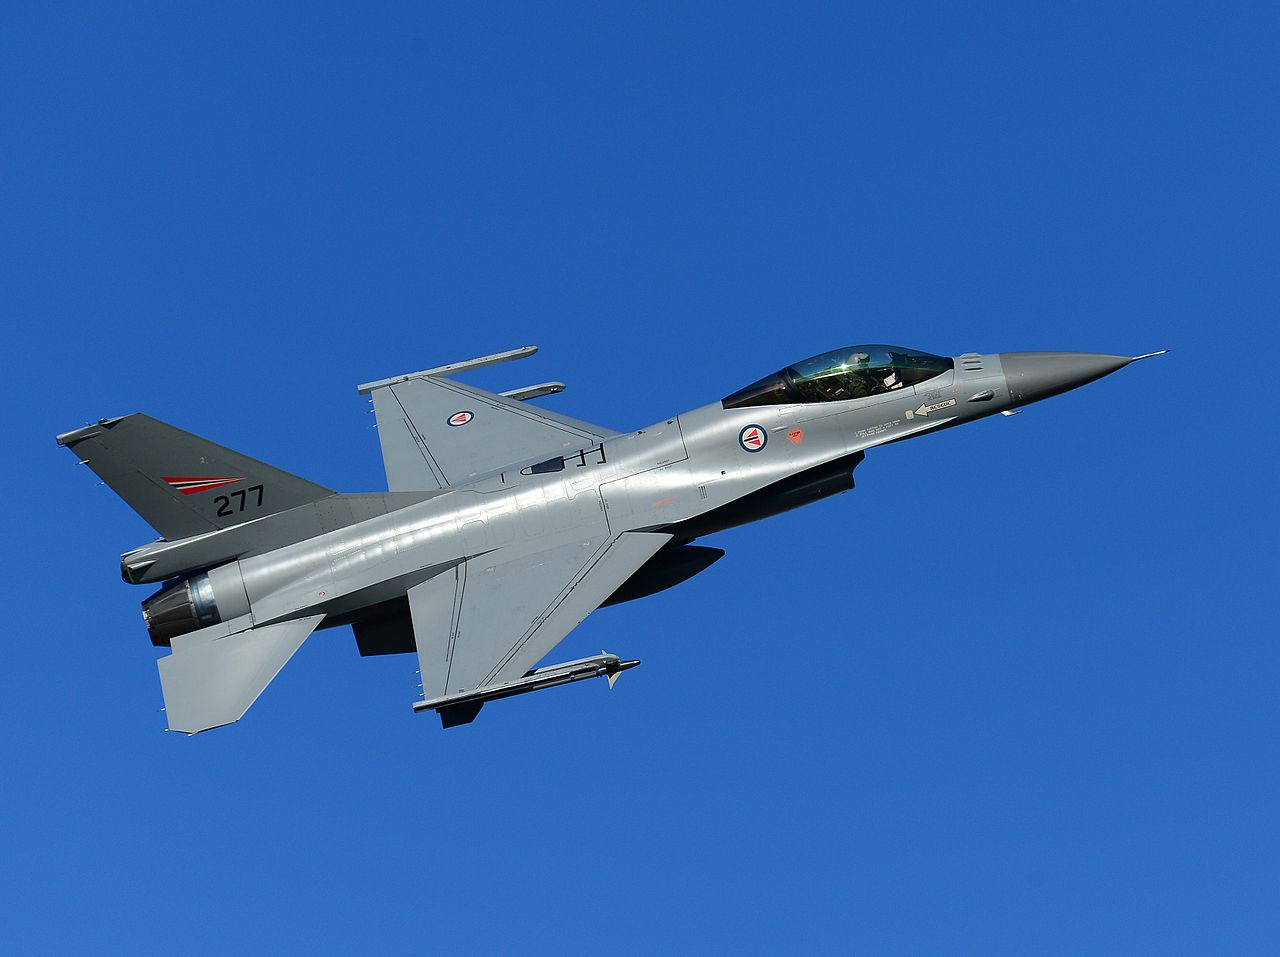 So…Can you actually buy a fighter jet? Royal Norwegian Air Force could soon sell its F-16 Fighting Falcon fleet - The Aviation Geek Club